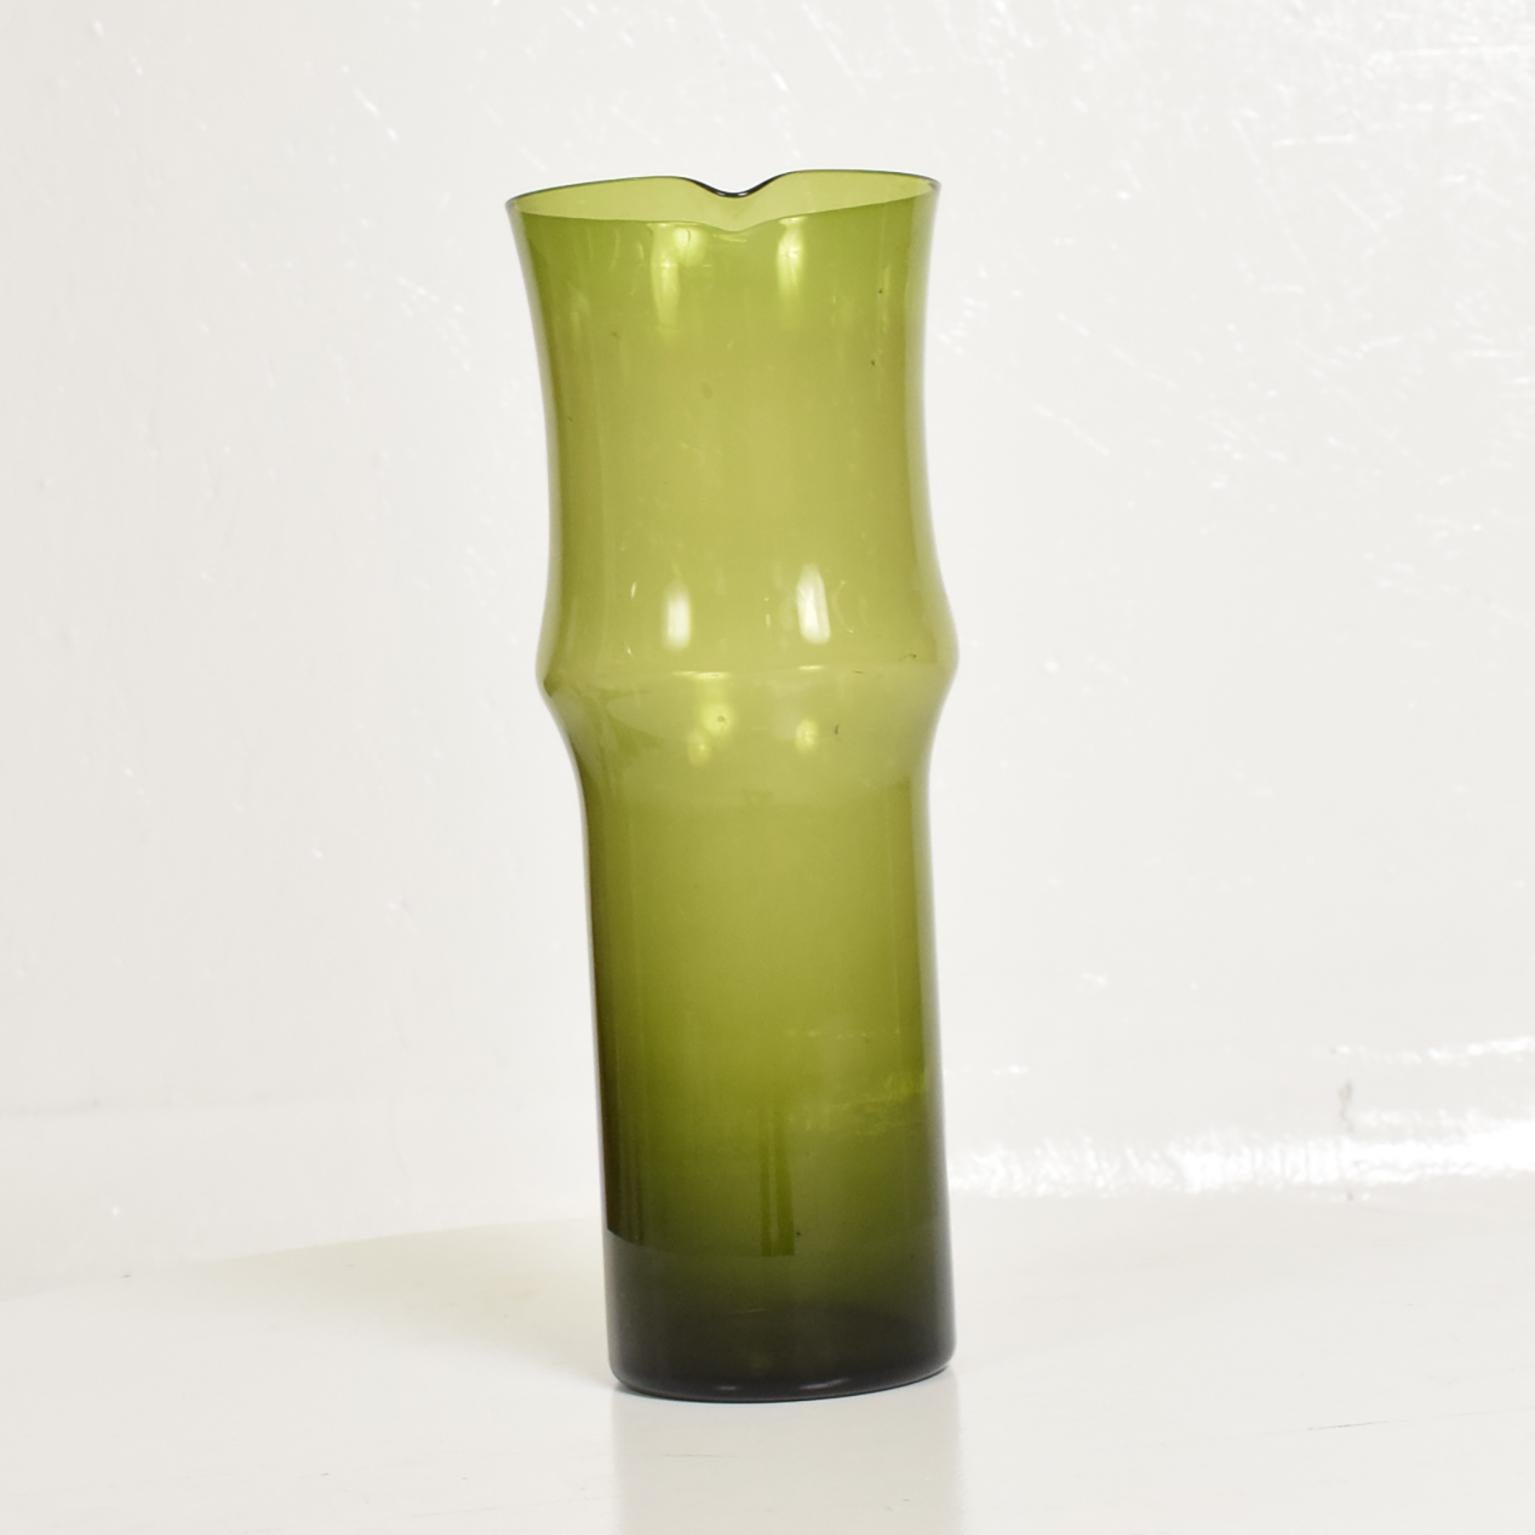 For your consideration, a vintage green glass pitcher vase by Tapio Wirkkala for Iittala.
In excellent condition. 

Dimensions: 9 3/4